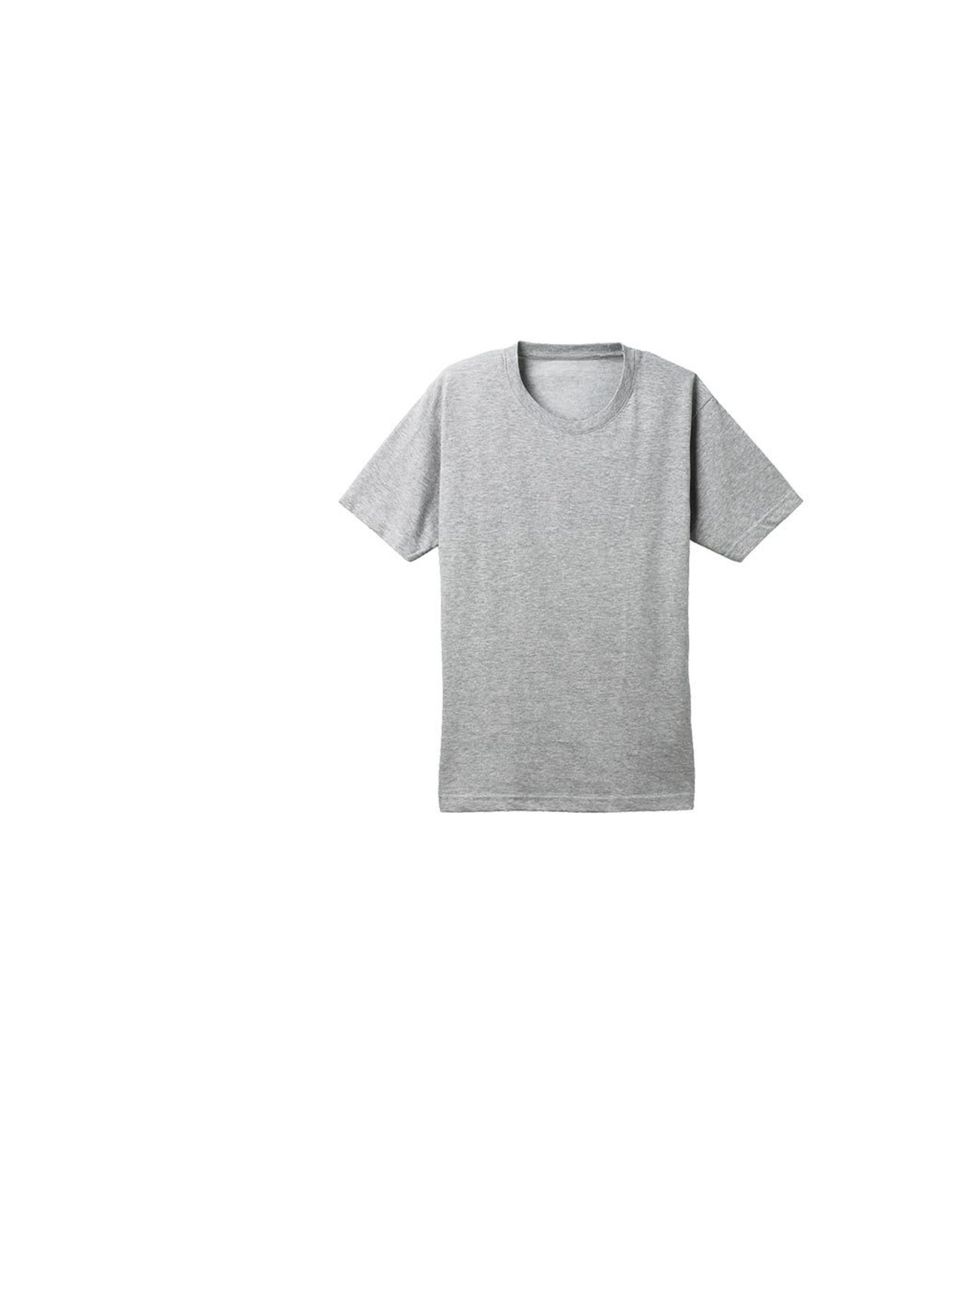 <p>Along with tried and trusted jeans, a plain tee is the building block of any wardrobe, <a href="http://www.uniqlo.com/uk/store/goods/075209">Uniqlo</a> T-shirt, £4.90</p>